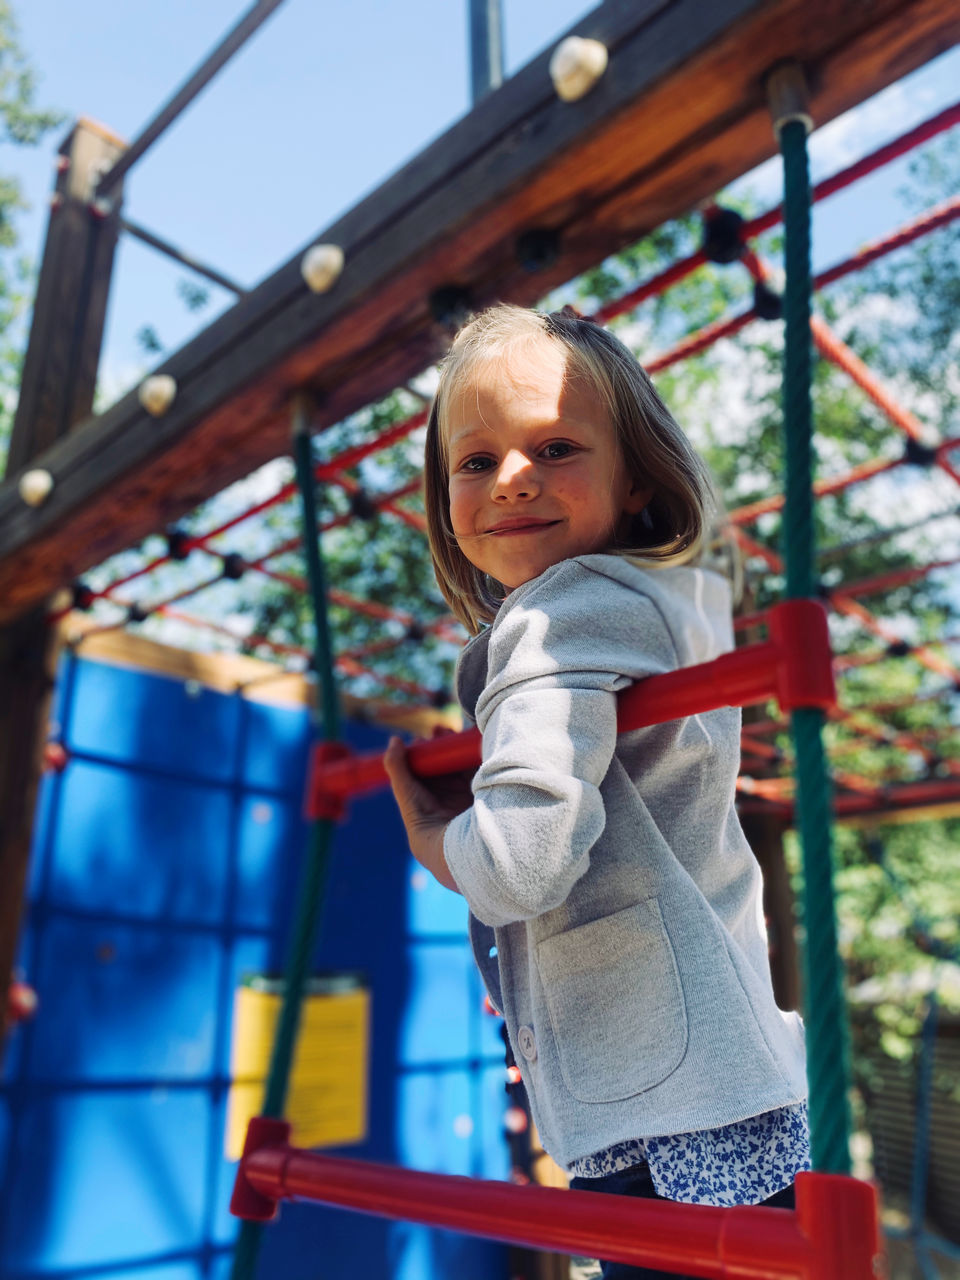 PORTRAIT OF CUTE GIRL STANDING ON PLAYGROUND